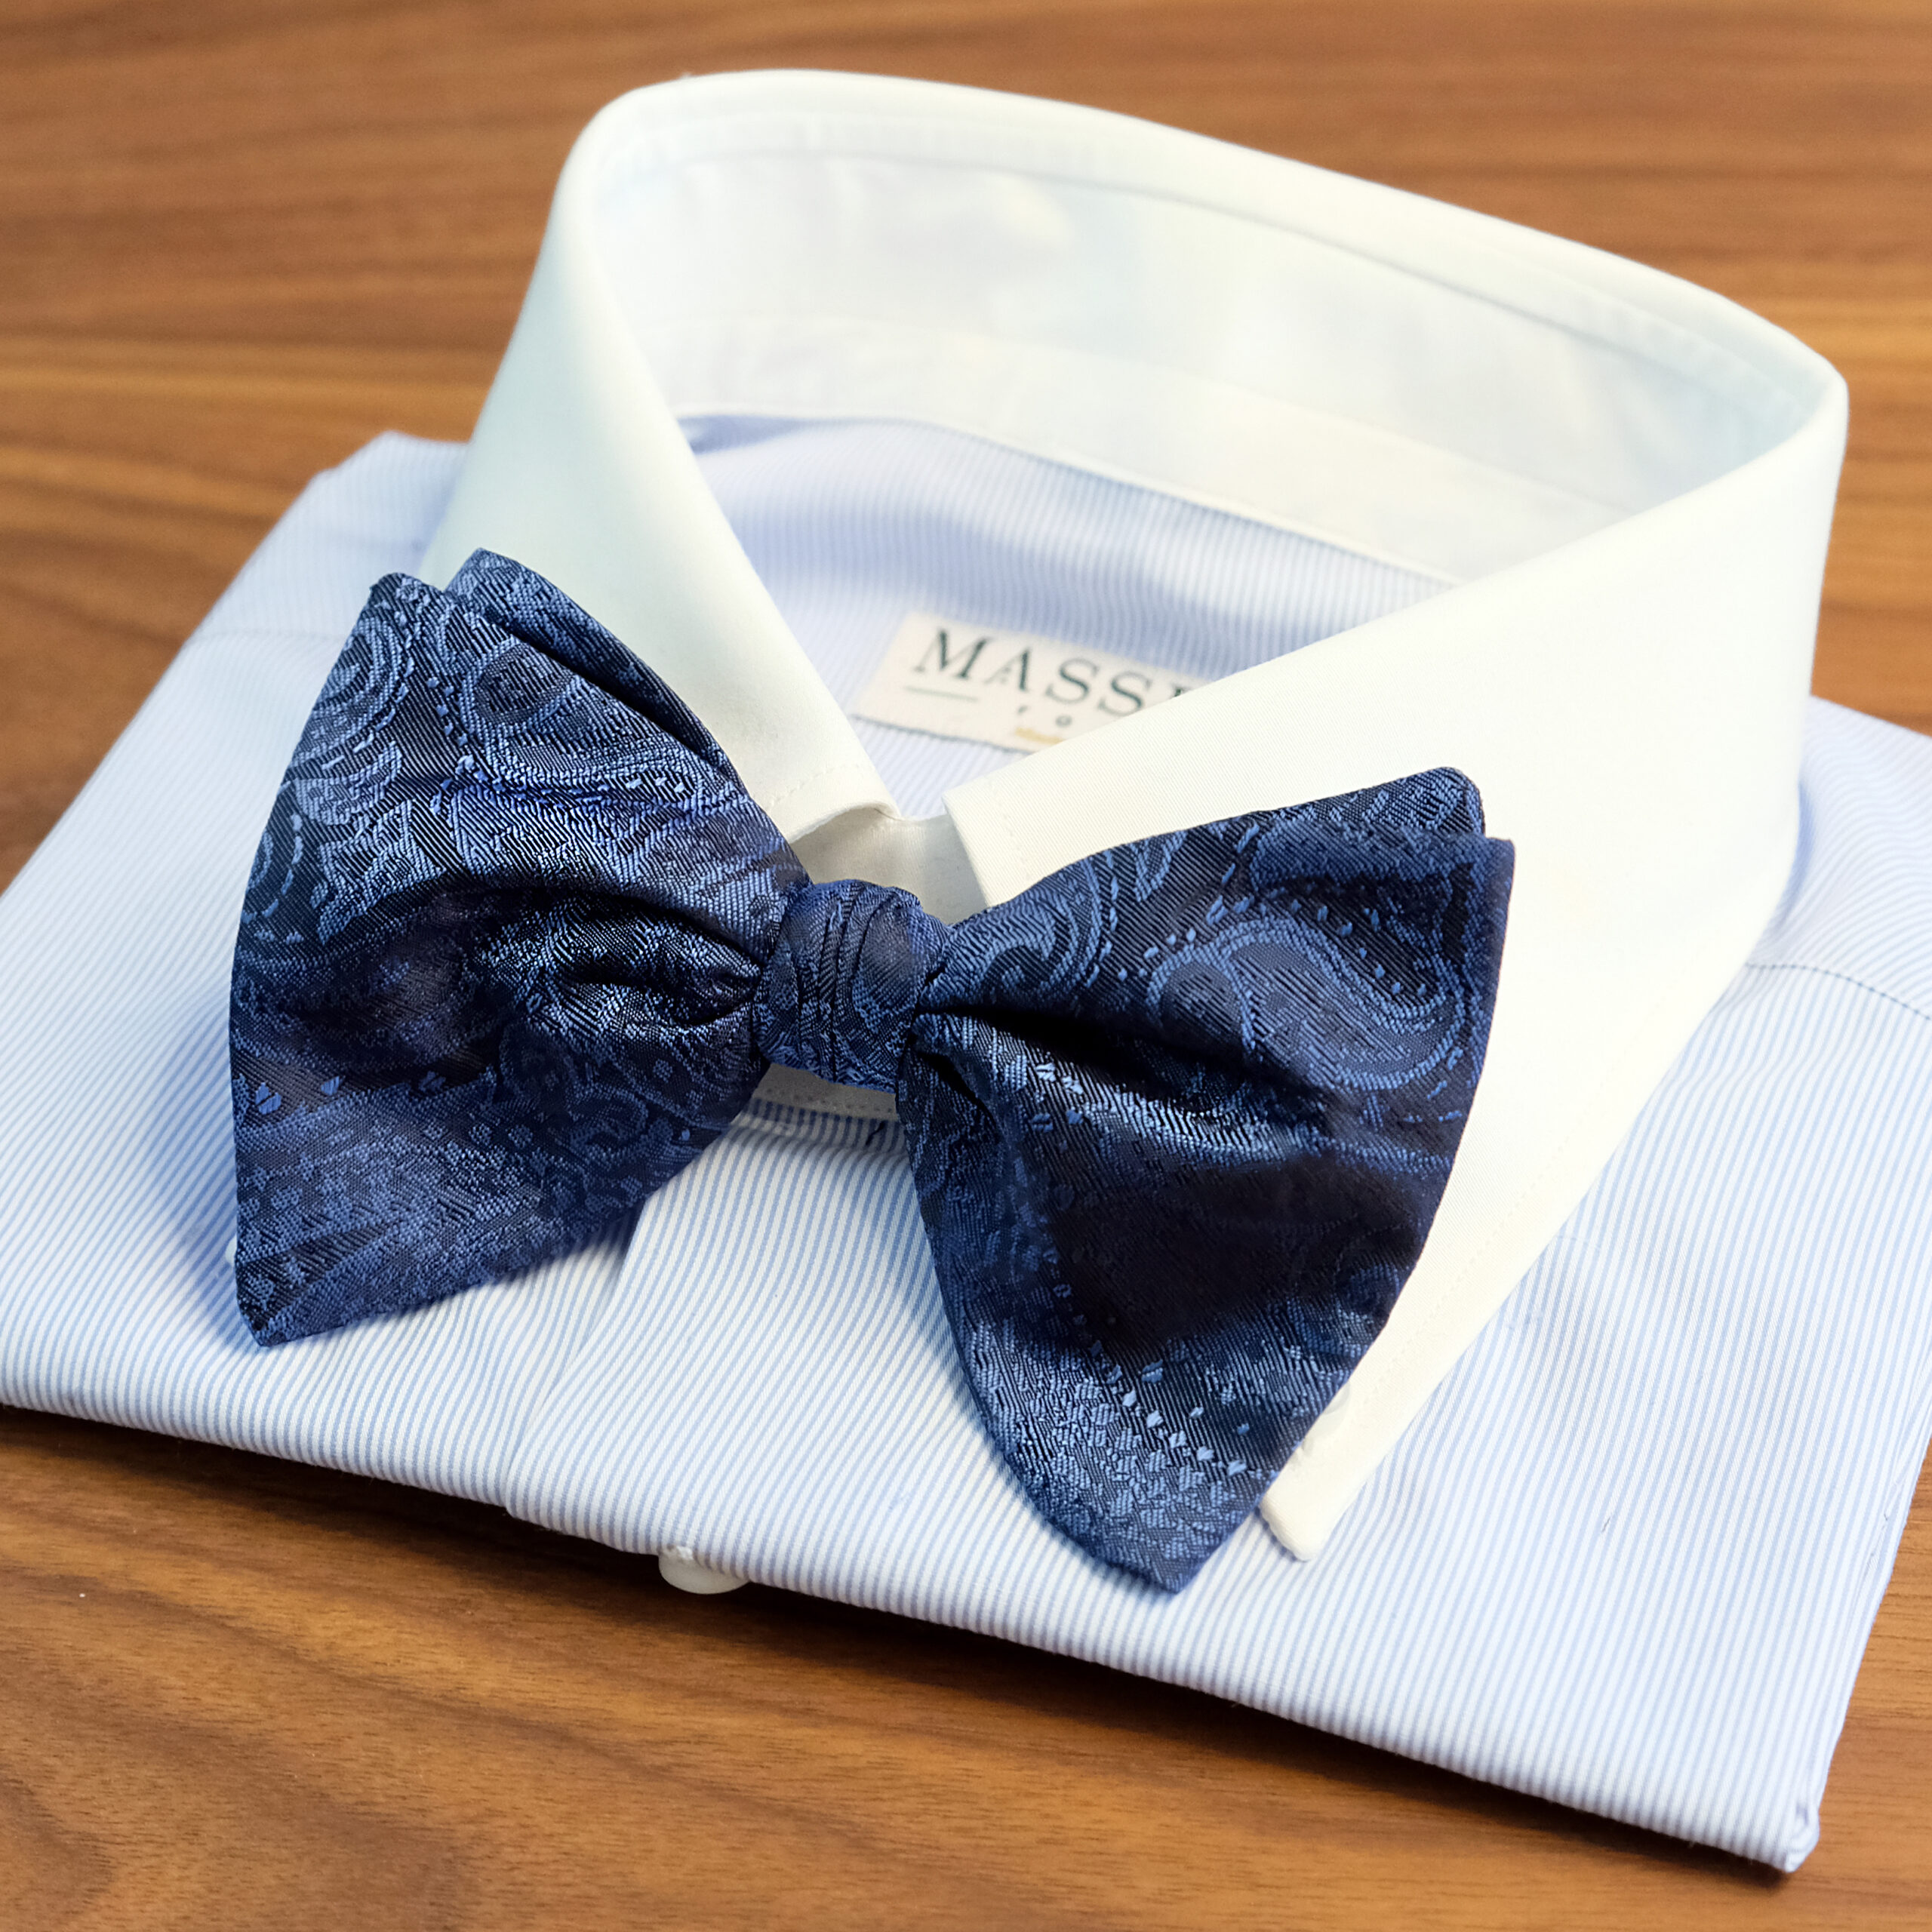 A bow tie is on the collar of a shirt.